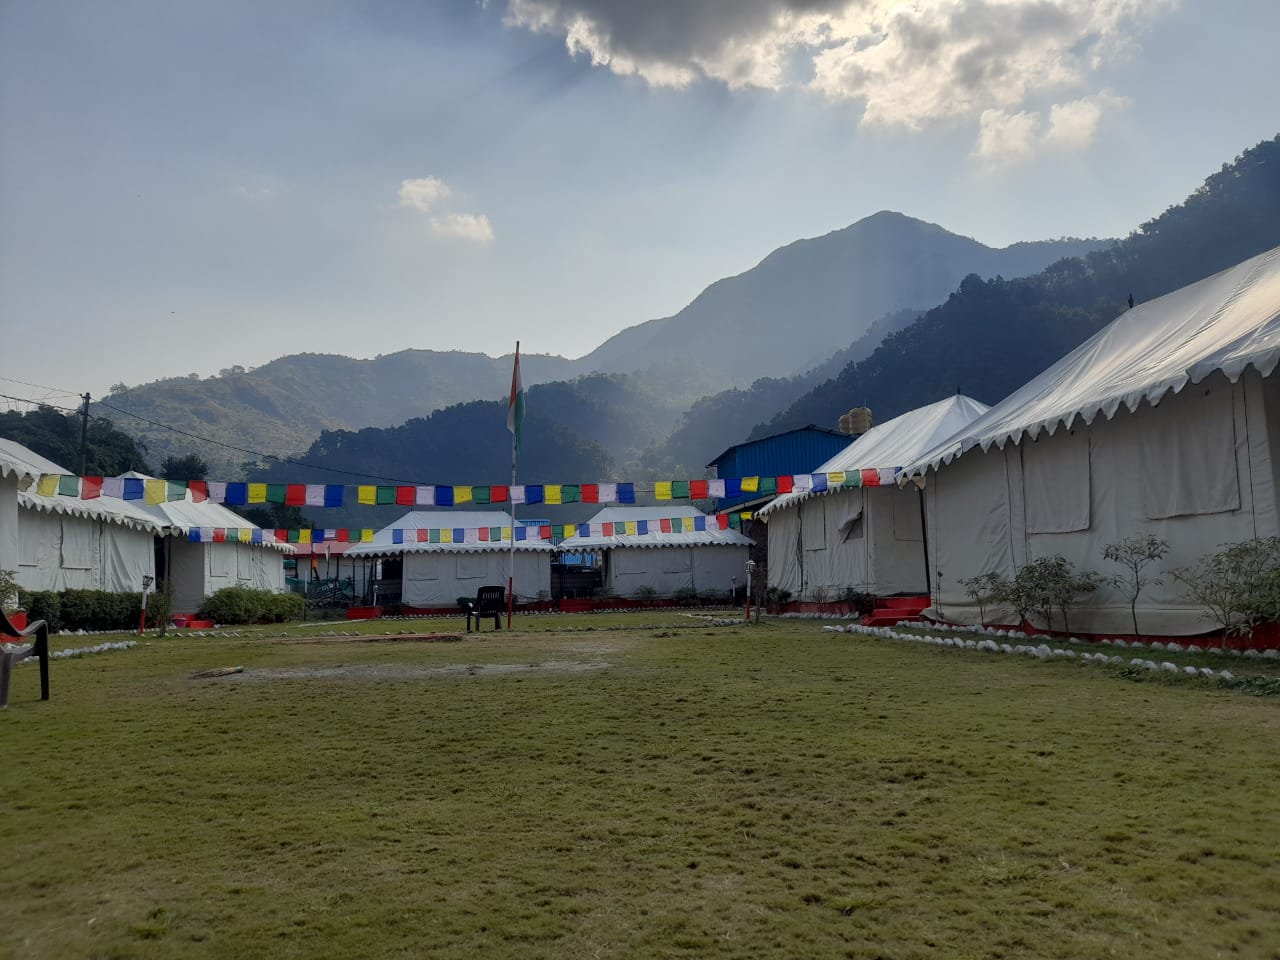 Deluxe Camping In Rishikesh